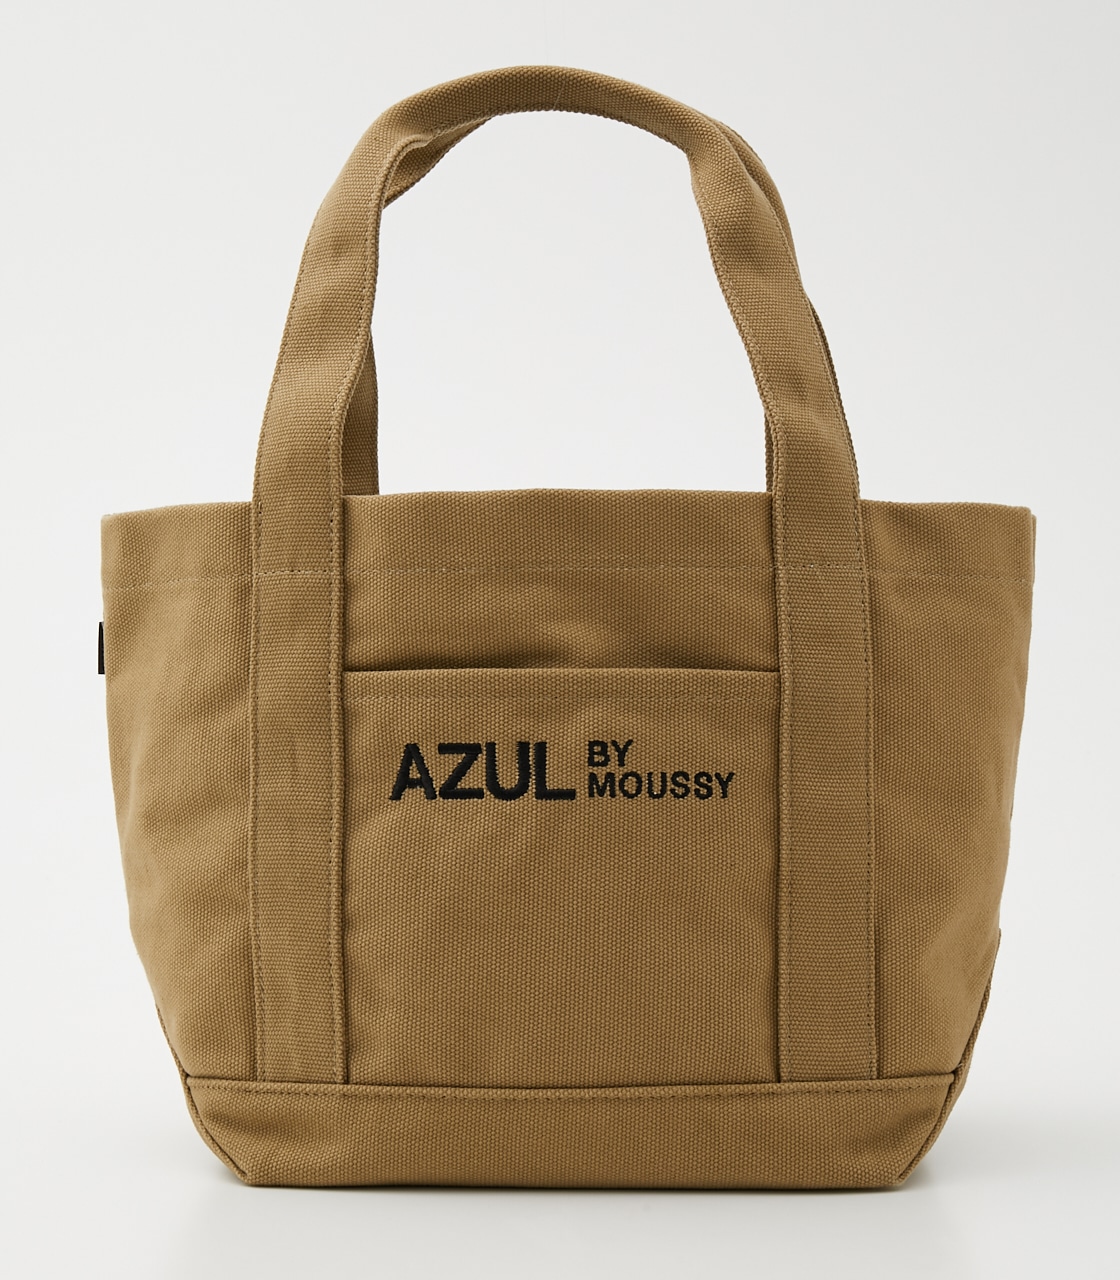 AZUL CANVAS TOTE BAG/AZULキャンバストートバッグ｜AZUL BY MOUSSY（アズールバイマウジー）公式通販サイト